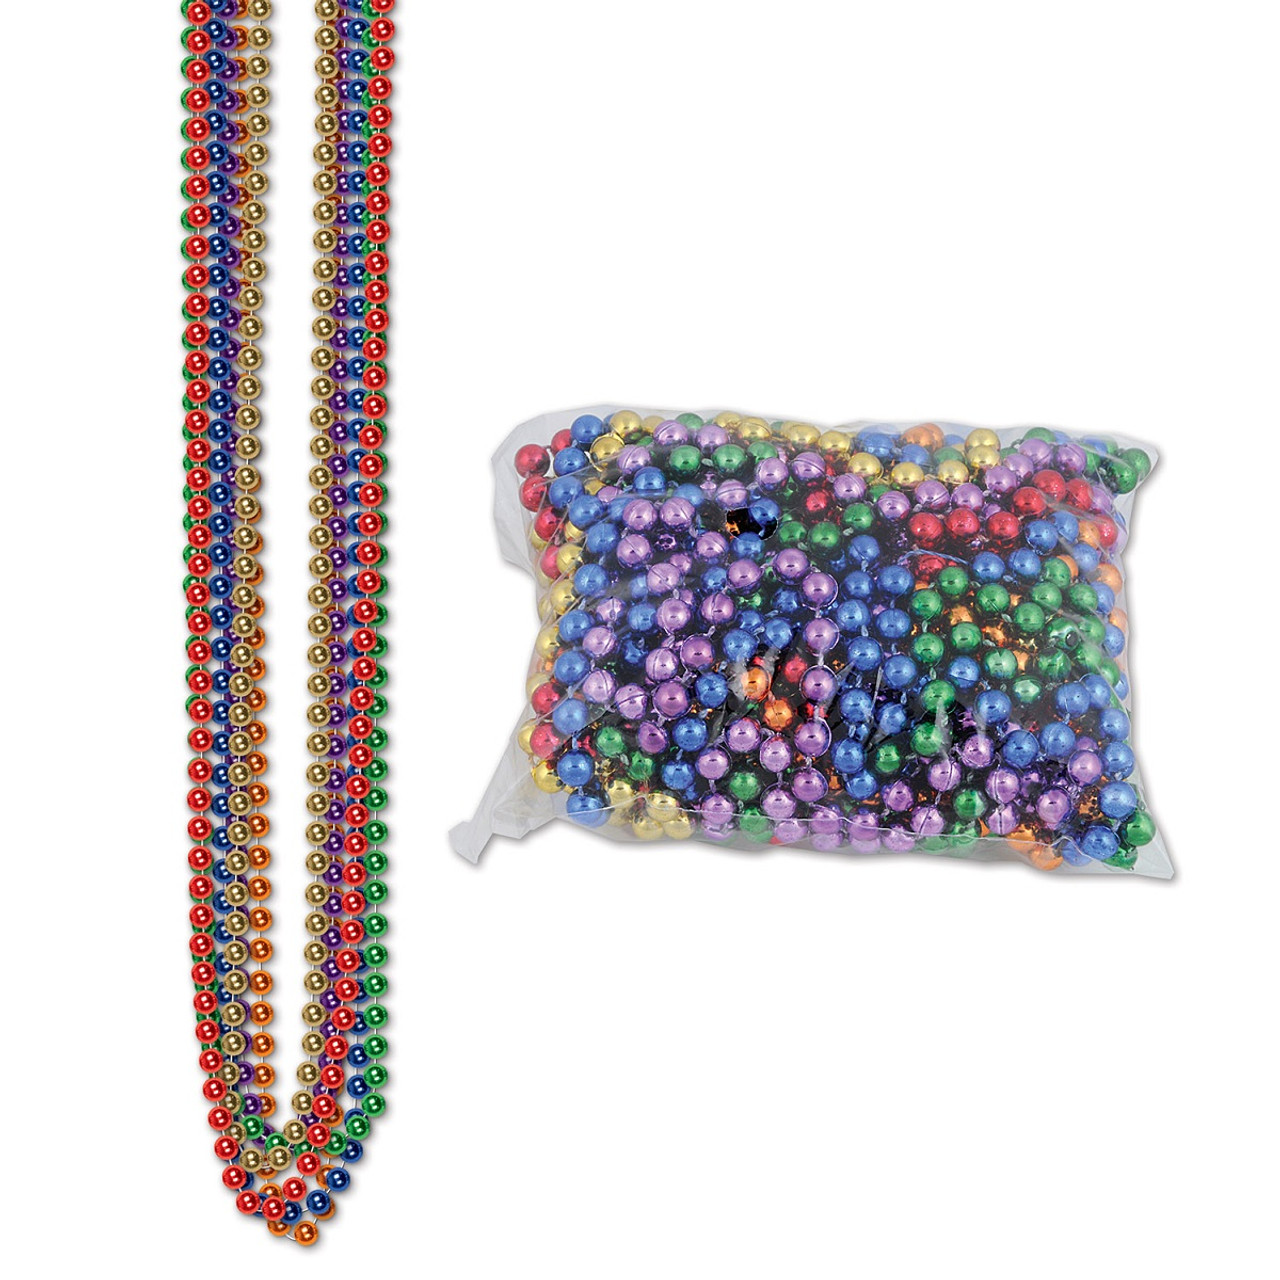 33 inch Mardi Gras Bead Necklaces - Pack of 12 (Green), Women's, Size: One size, Silver